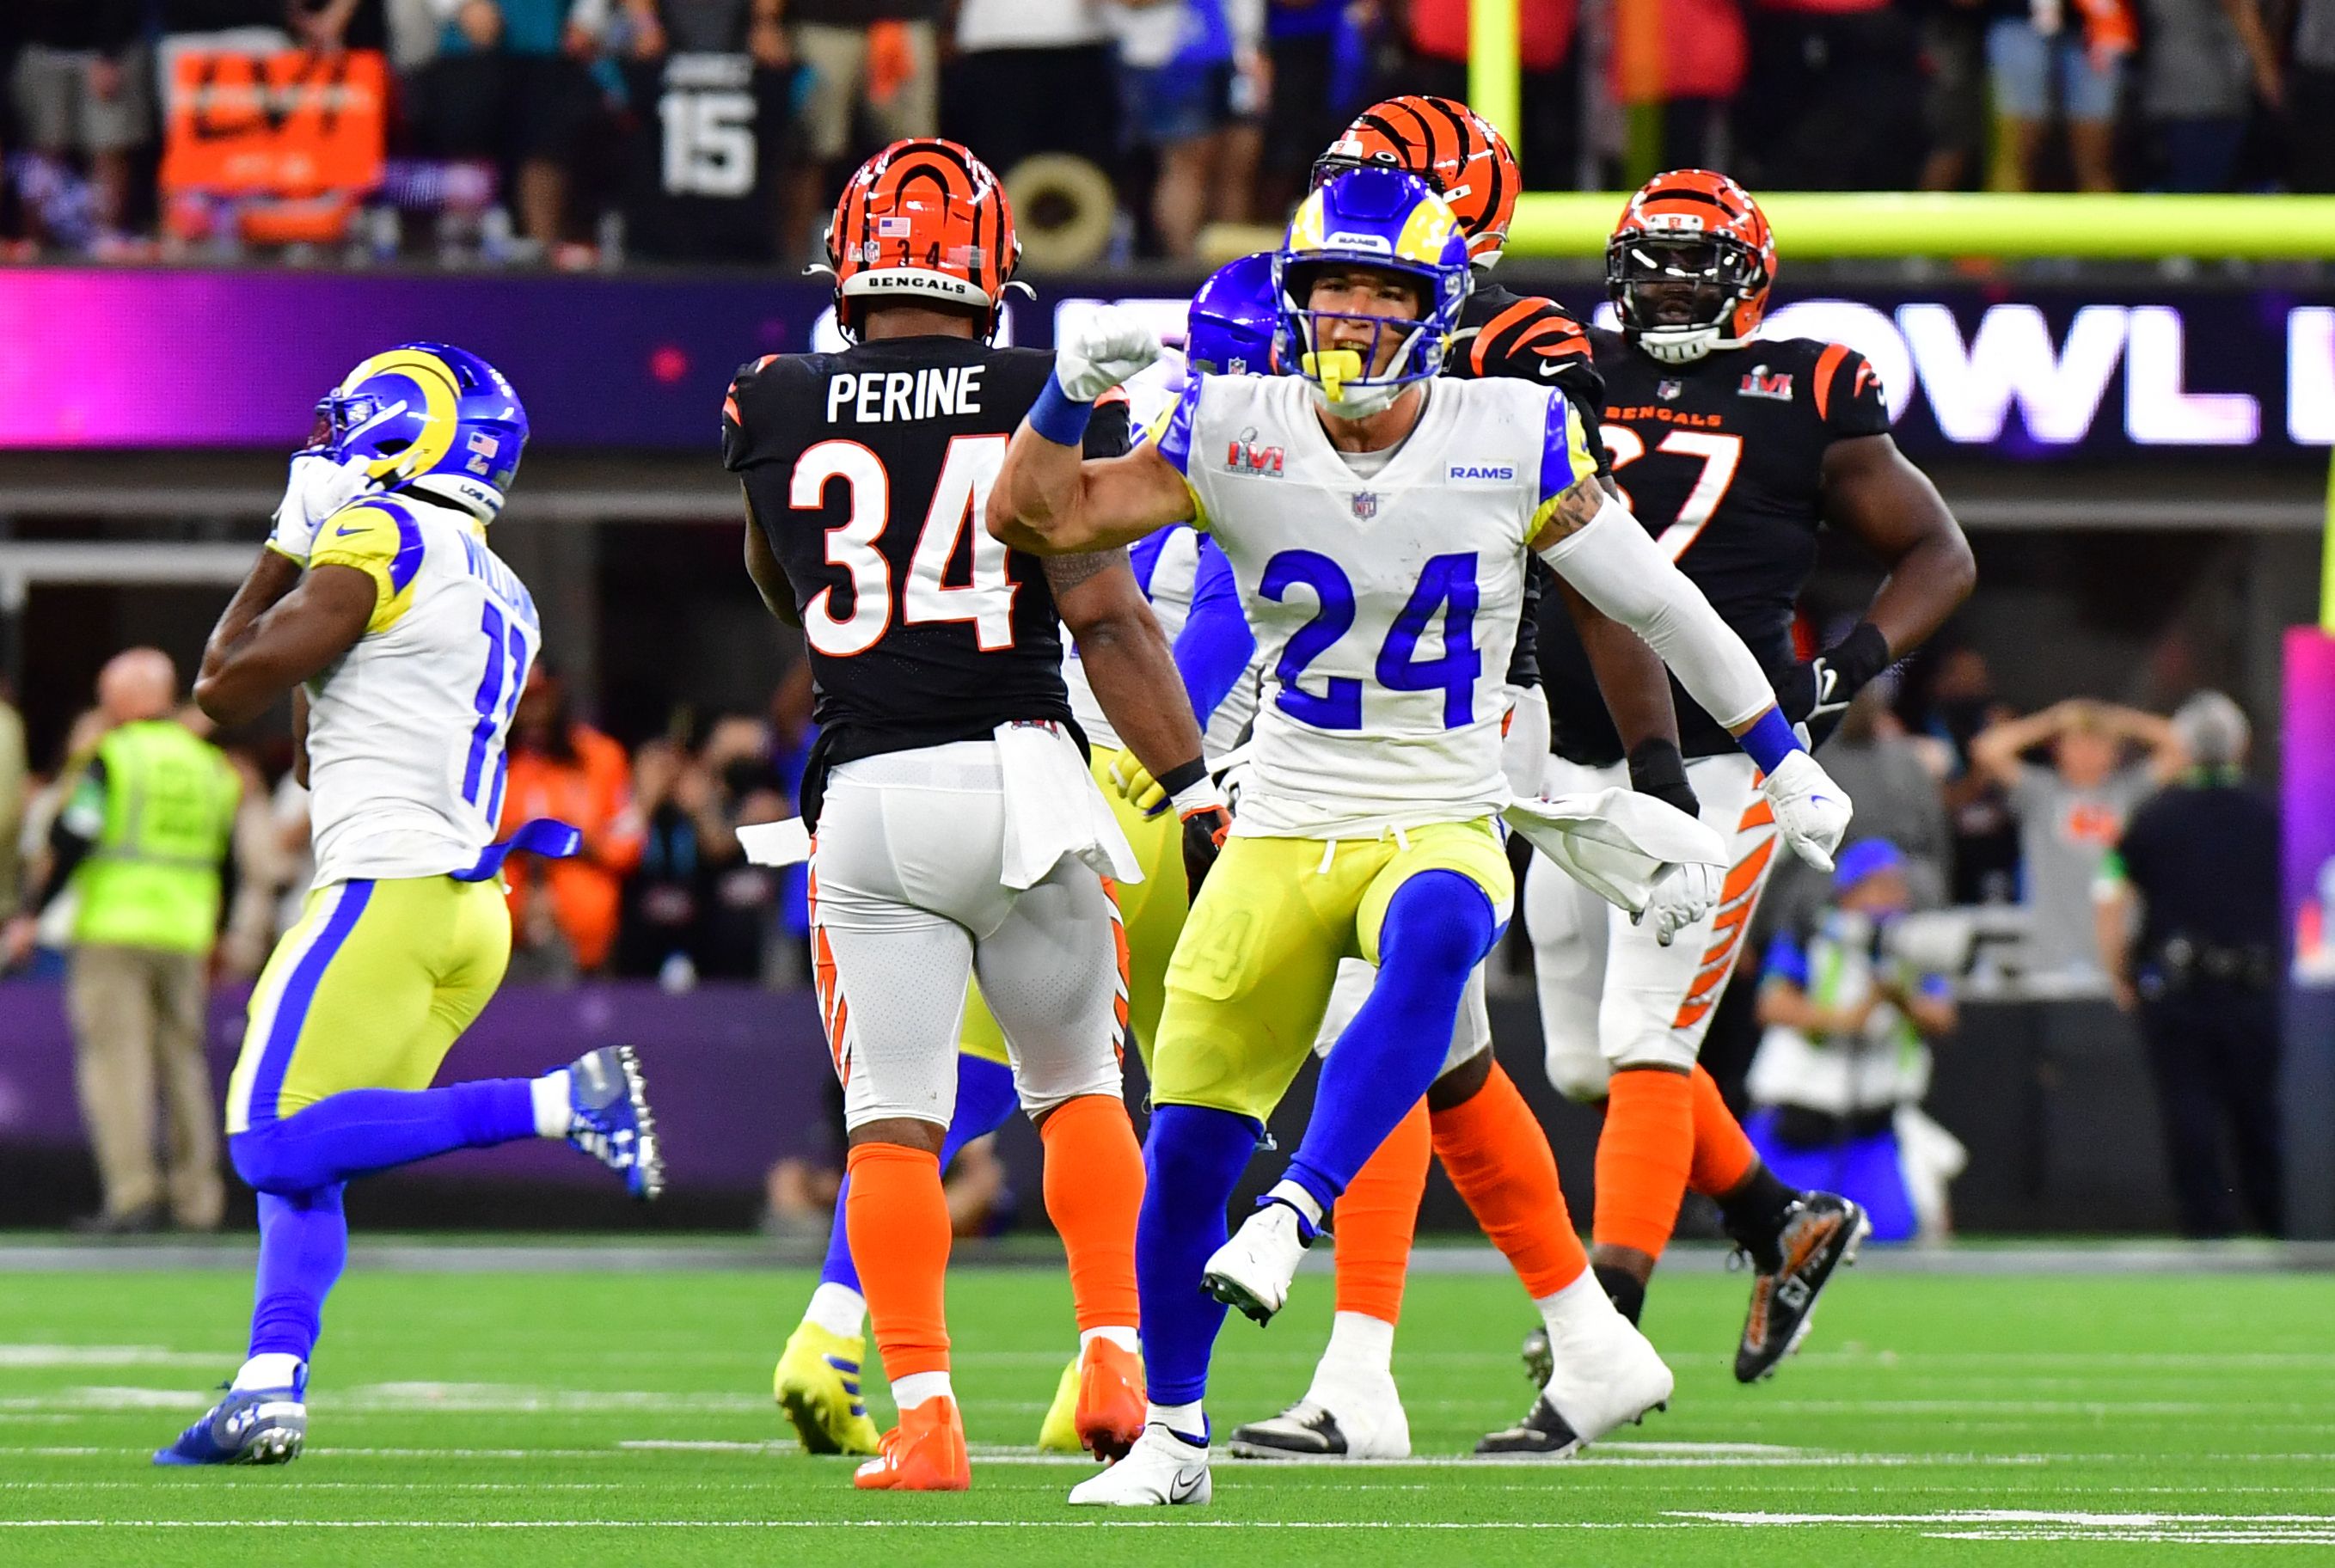 2022 Super Bowl: Rams vs. Bengals kickoff time, TV channel, online